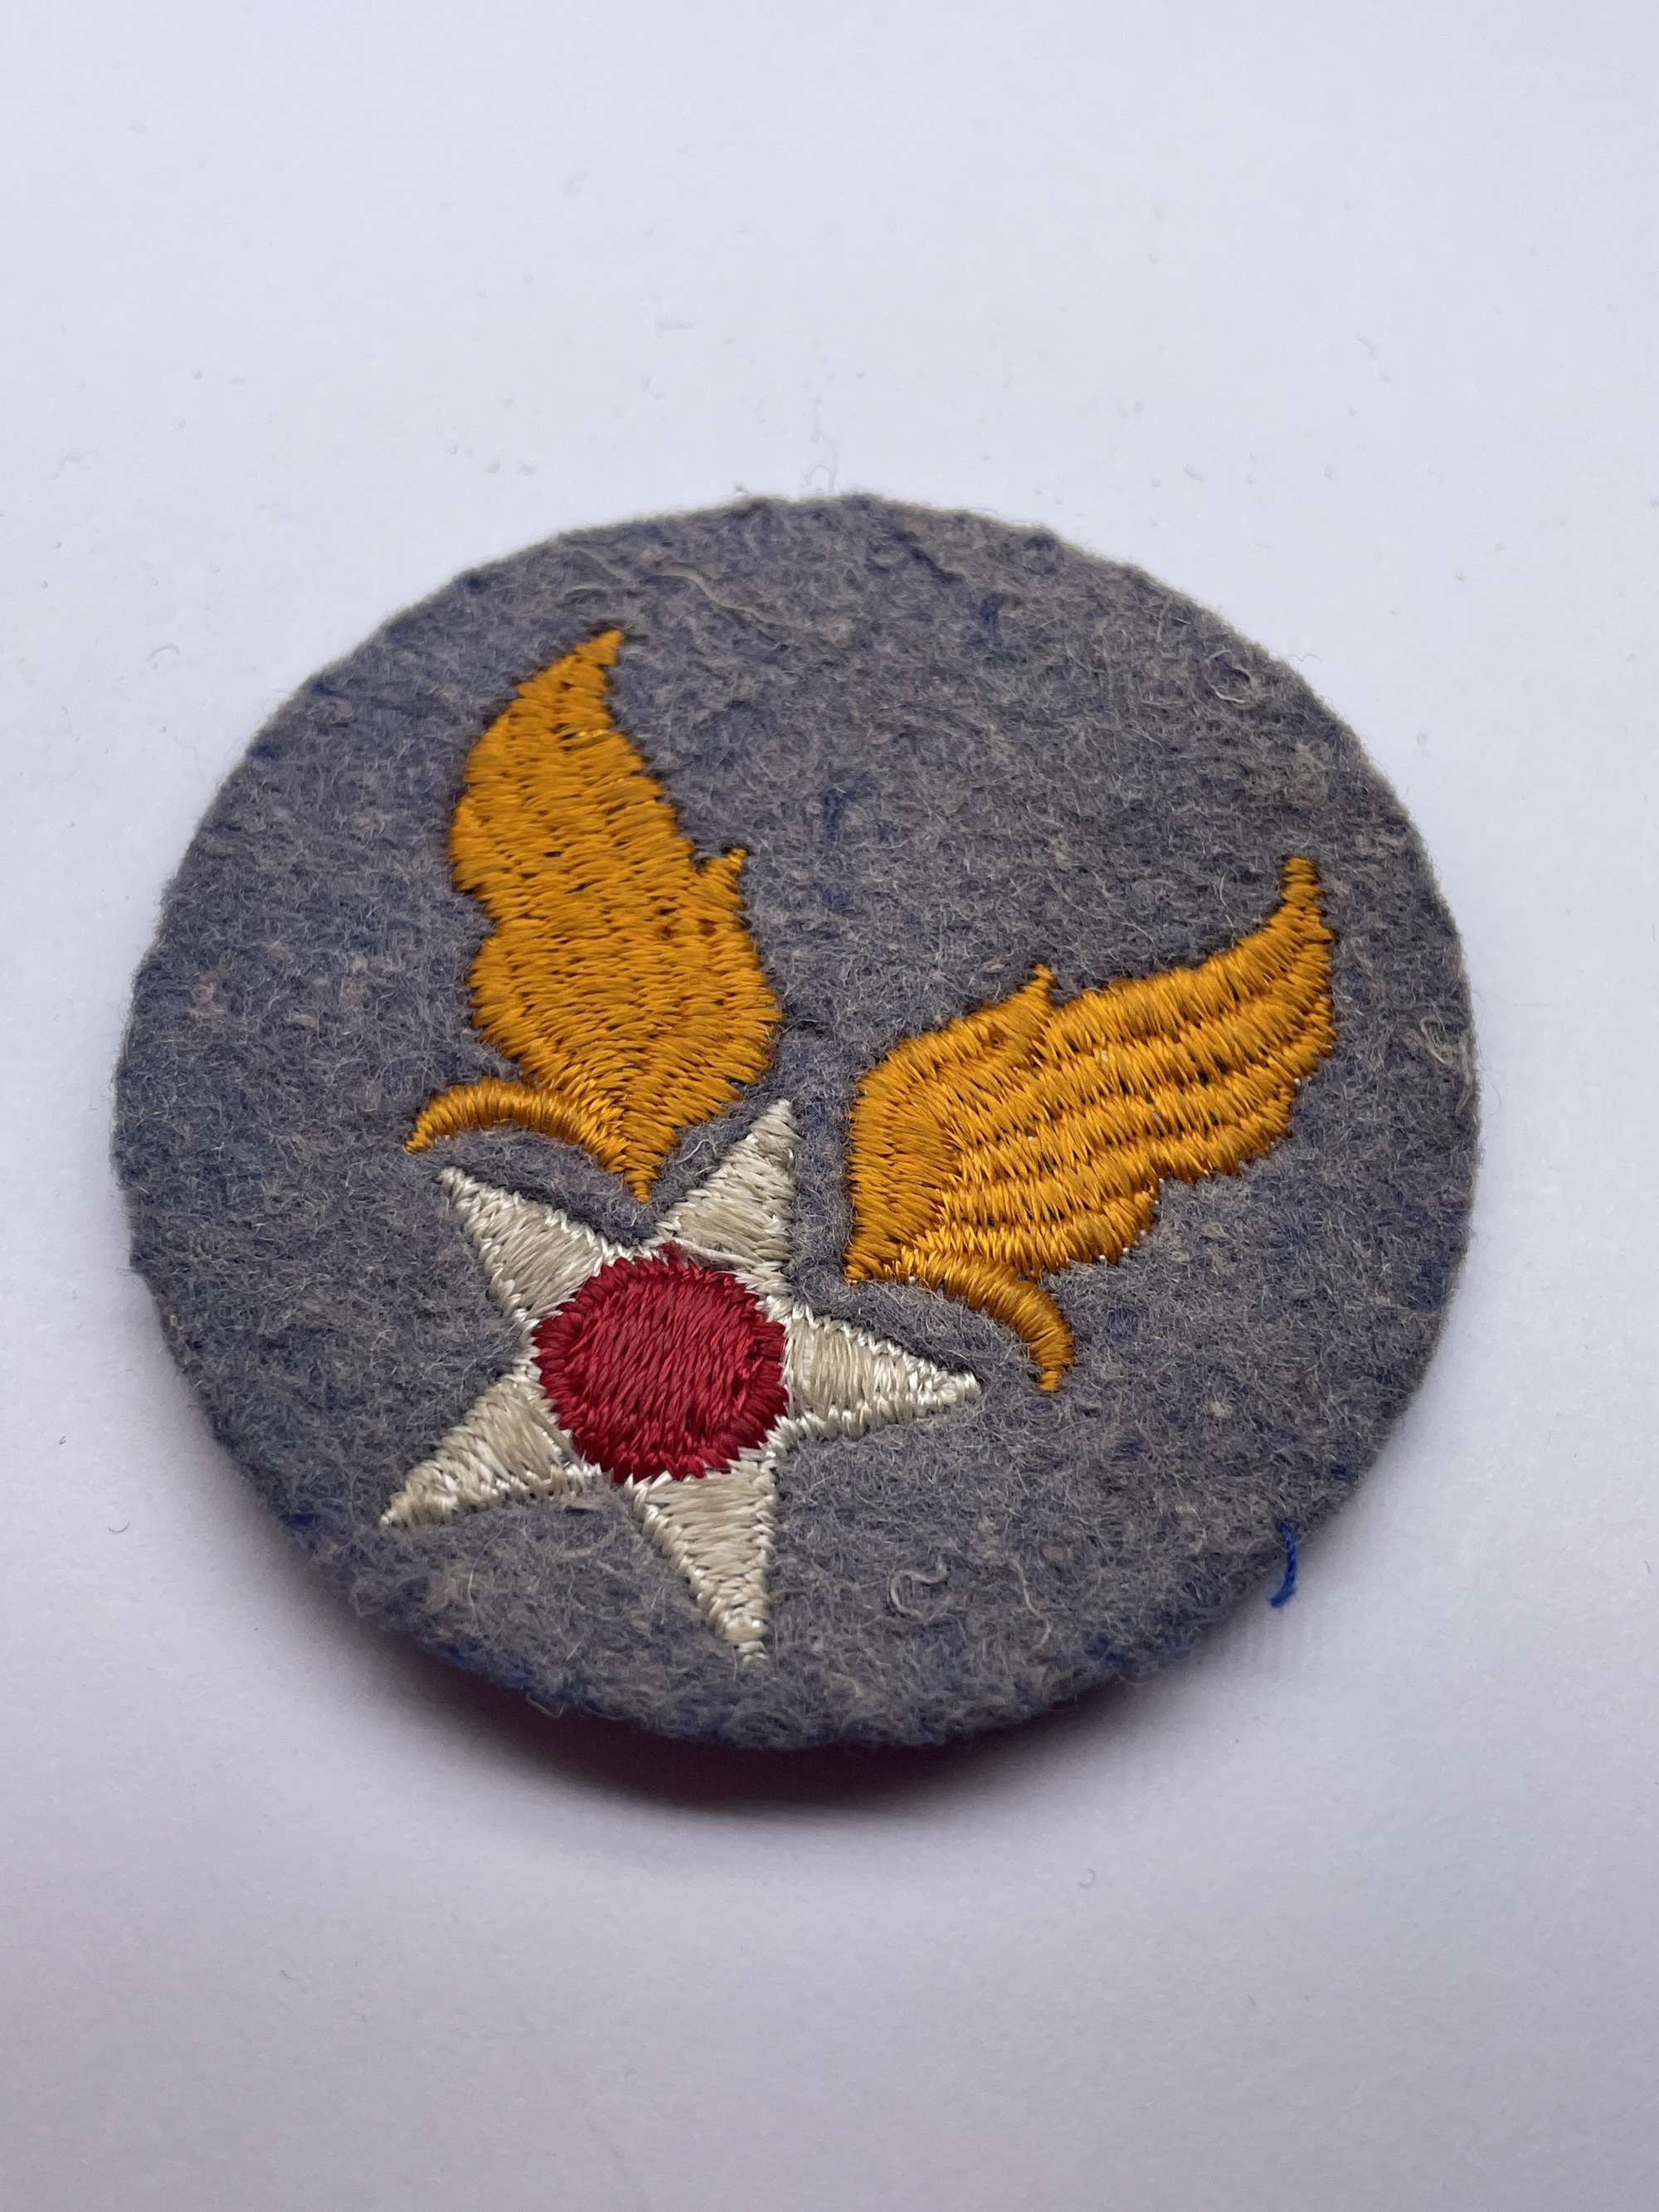 Original World War Two American Army Air Force Patch, 